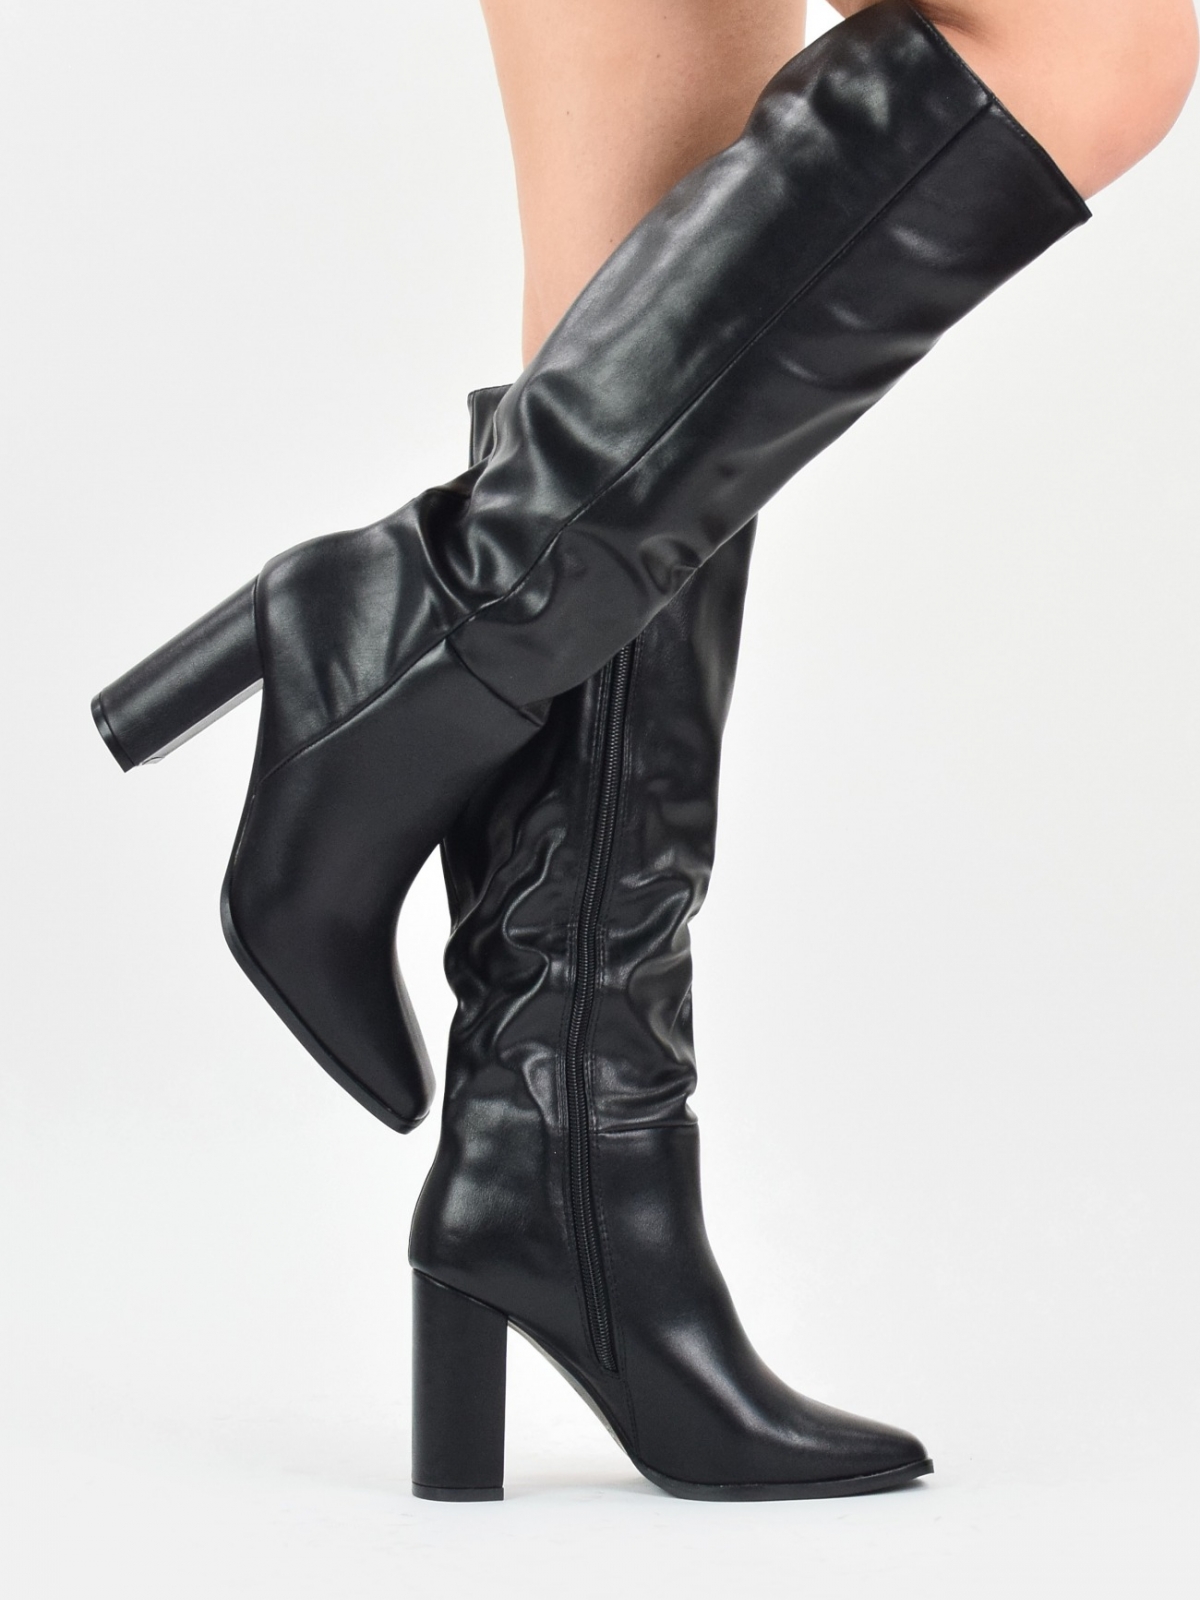 Squere toe mid heeled knee high boots in black